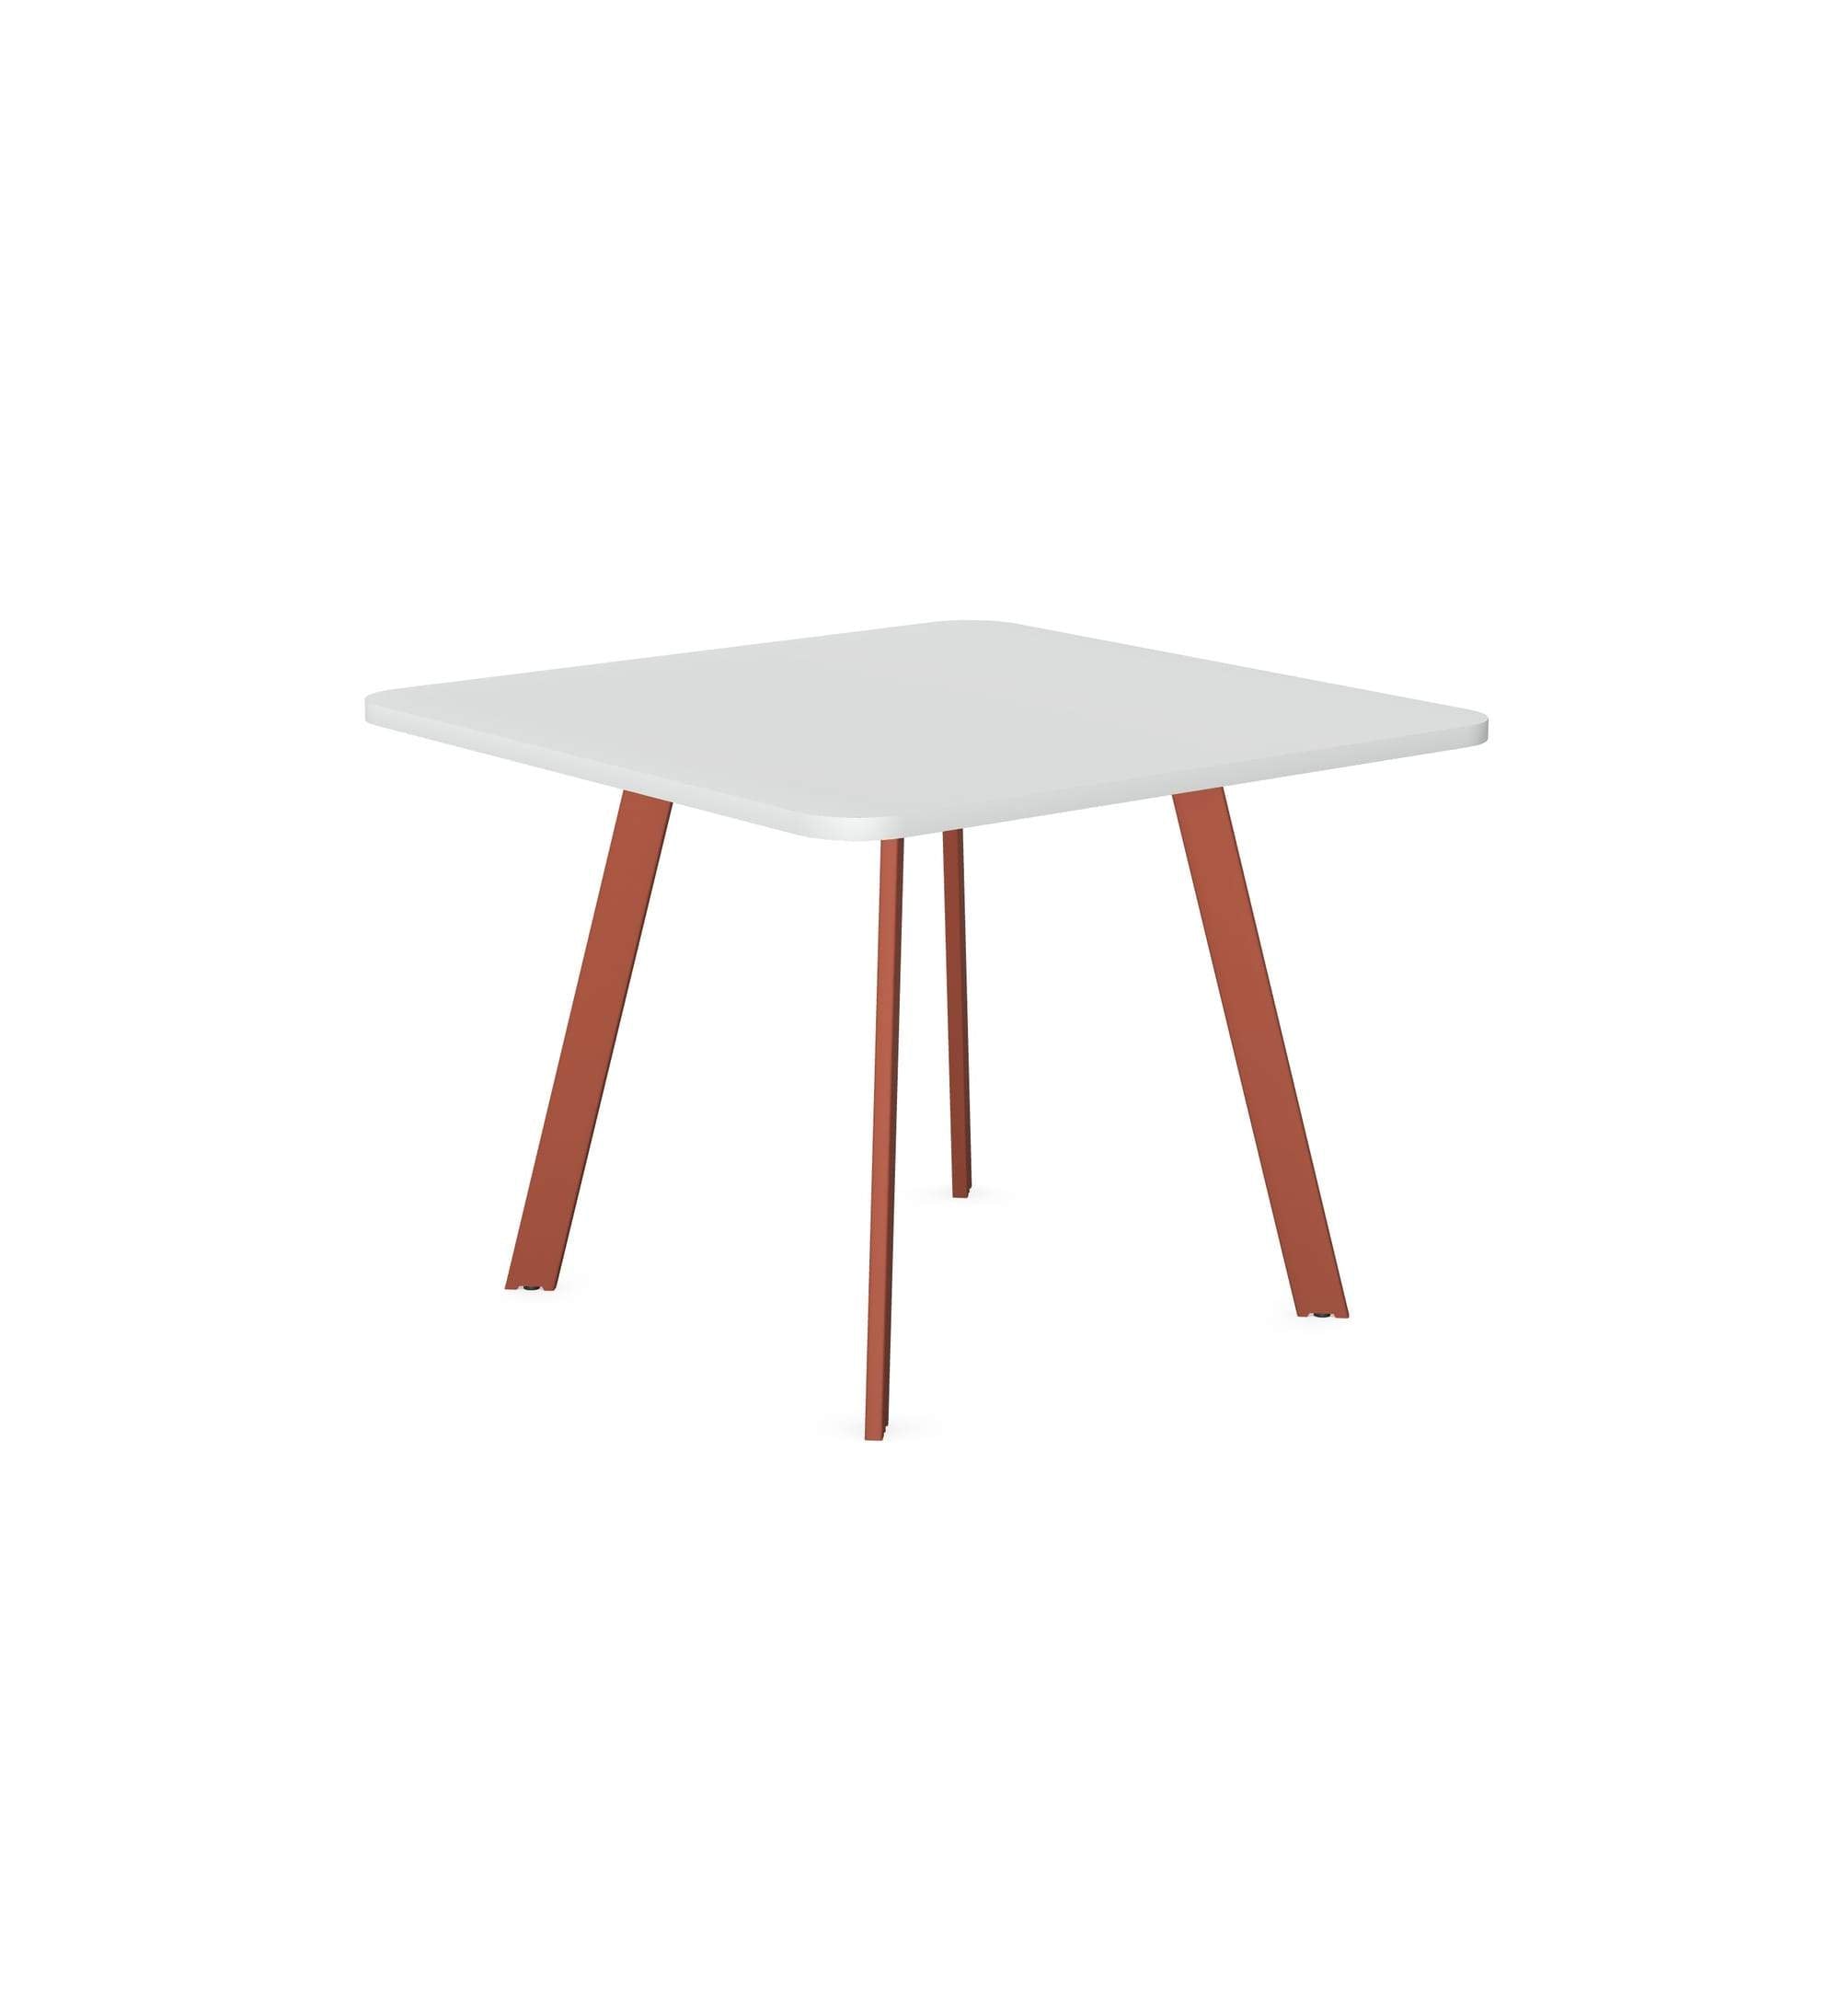 Axy-Line - Occasional Tables, Squared Tops, Leg-A